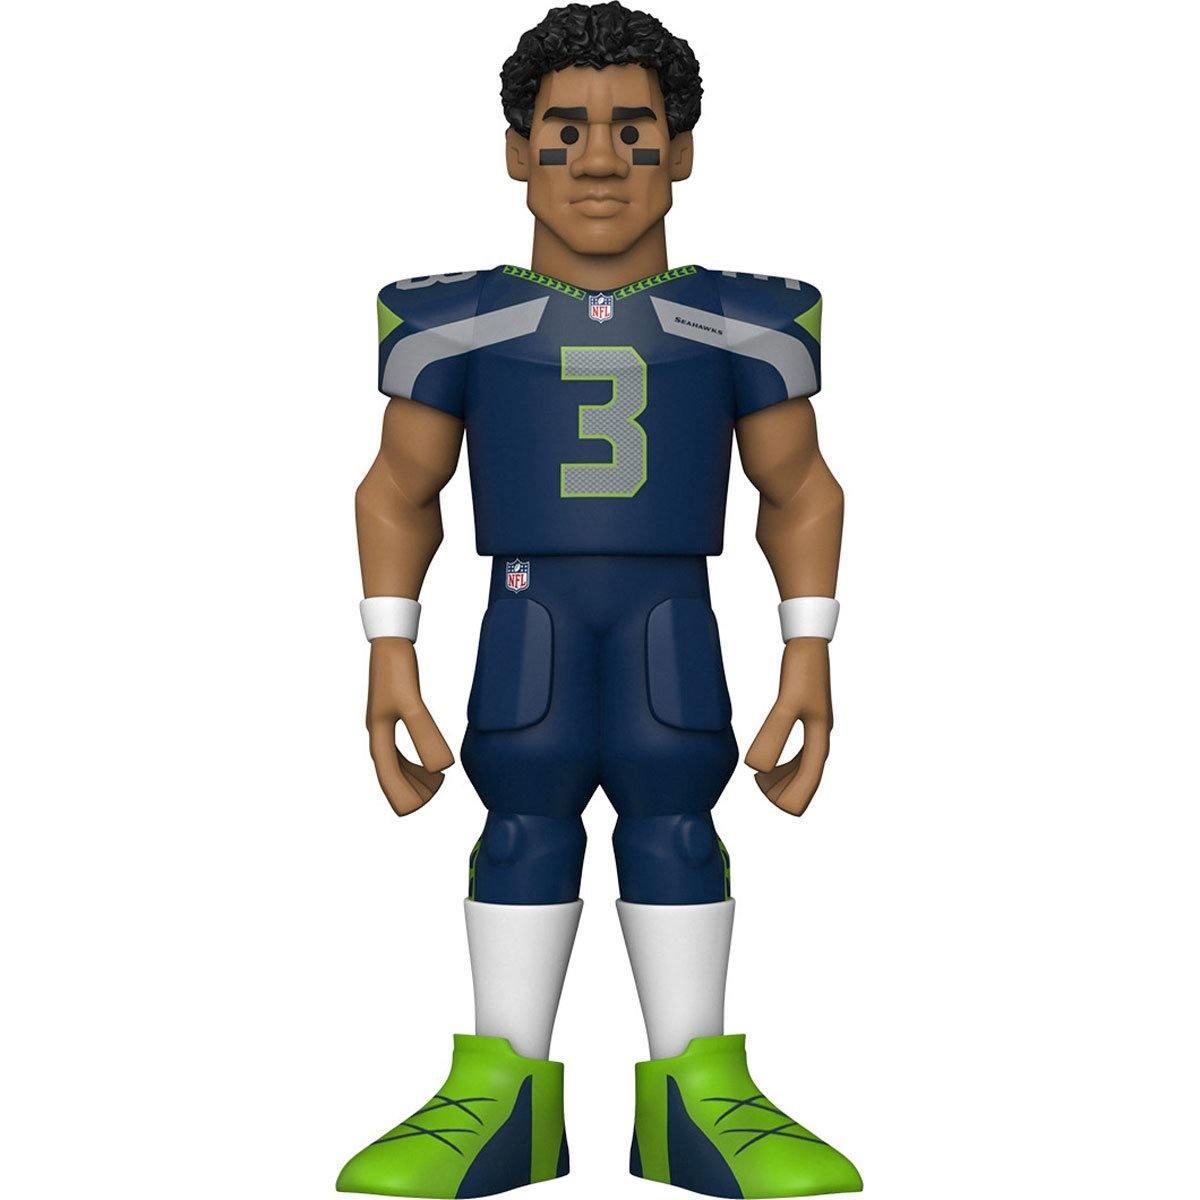 FUN57288 NFL: Seahawks - Russel Wilson (with chase) 12" Vinyl Gold - Funko - Titan Pop Culture